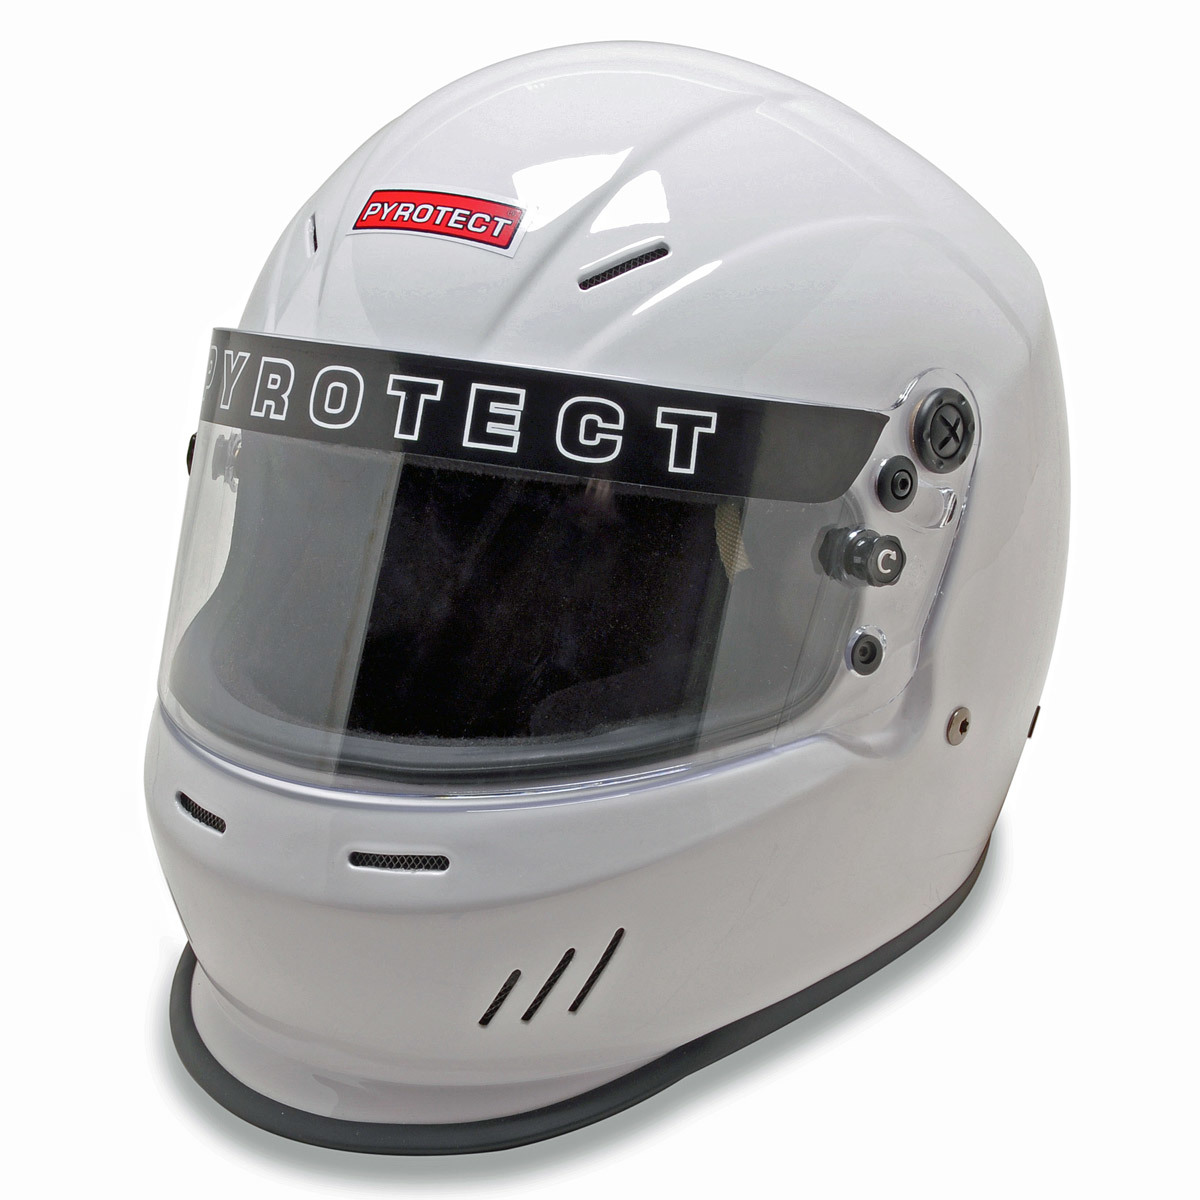 Pyrotect Safety 8200995 Helmet, Ultra-Sport Duckbill, Snell SA2015, Head and Neck Support Ready, White, X-Small, Each